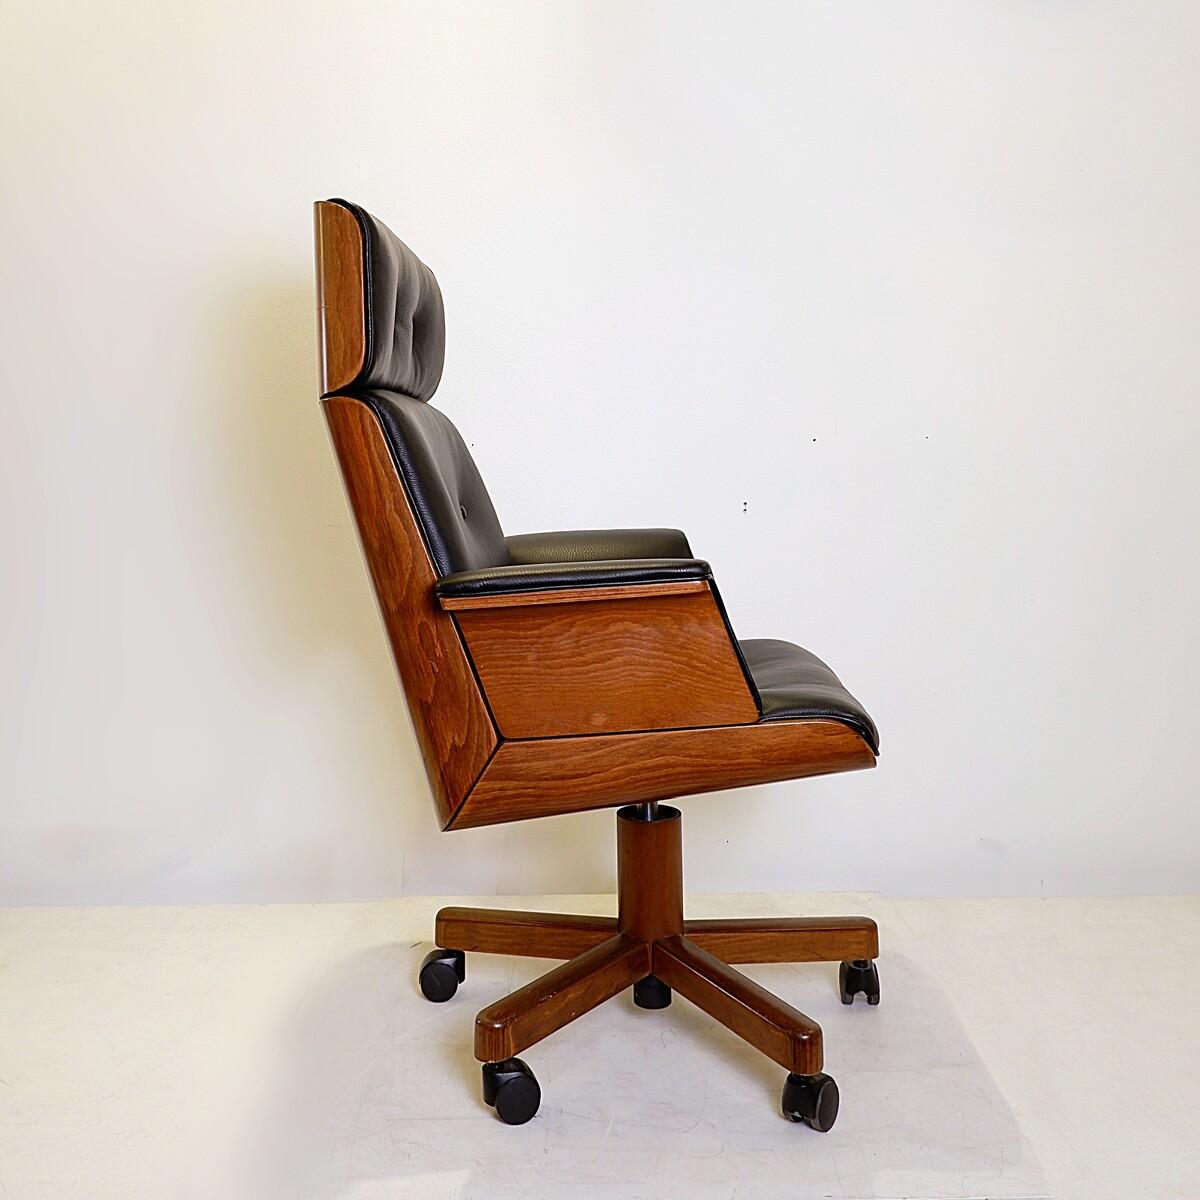 High quality and very comfortable office chair.